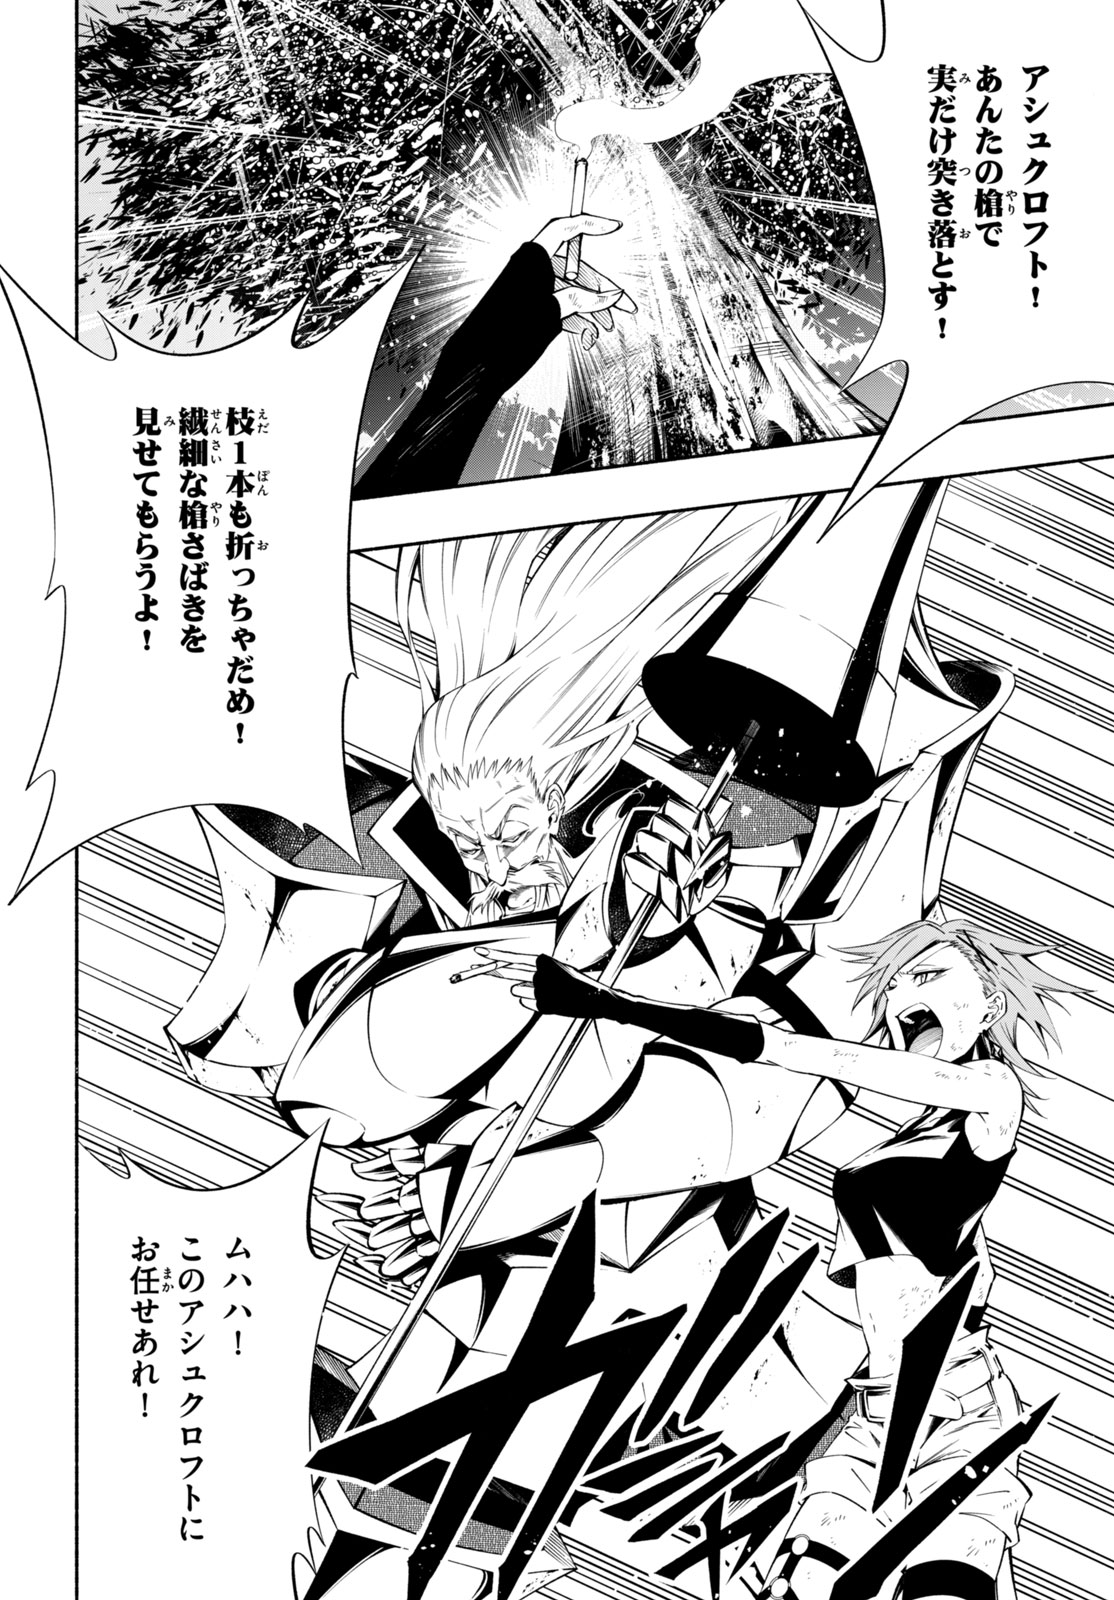 Shaman King: and a garden 第16.2話 - Page 1